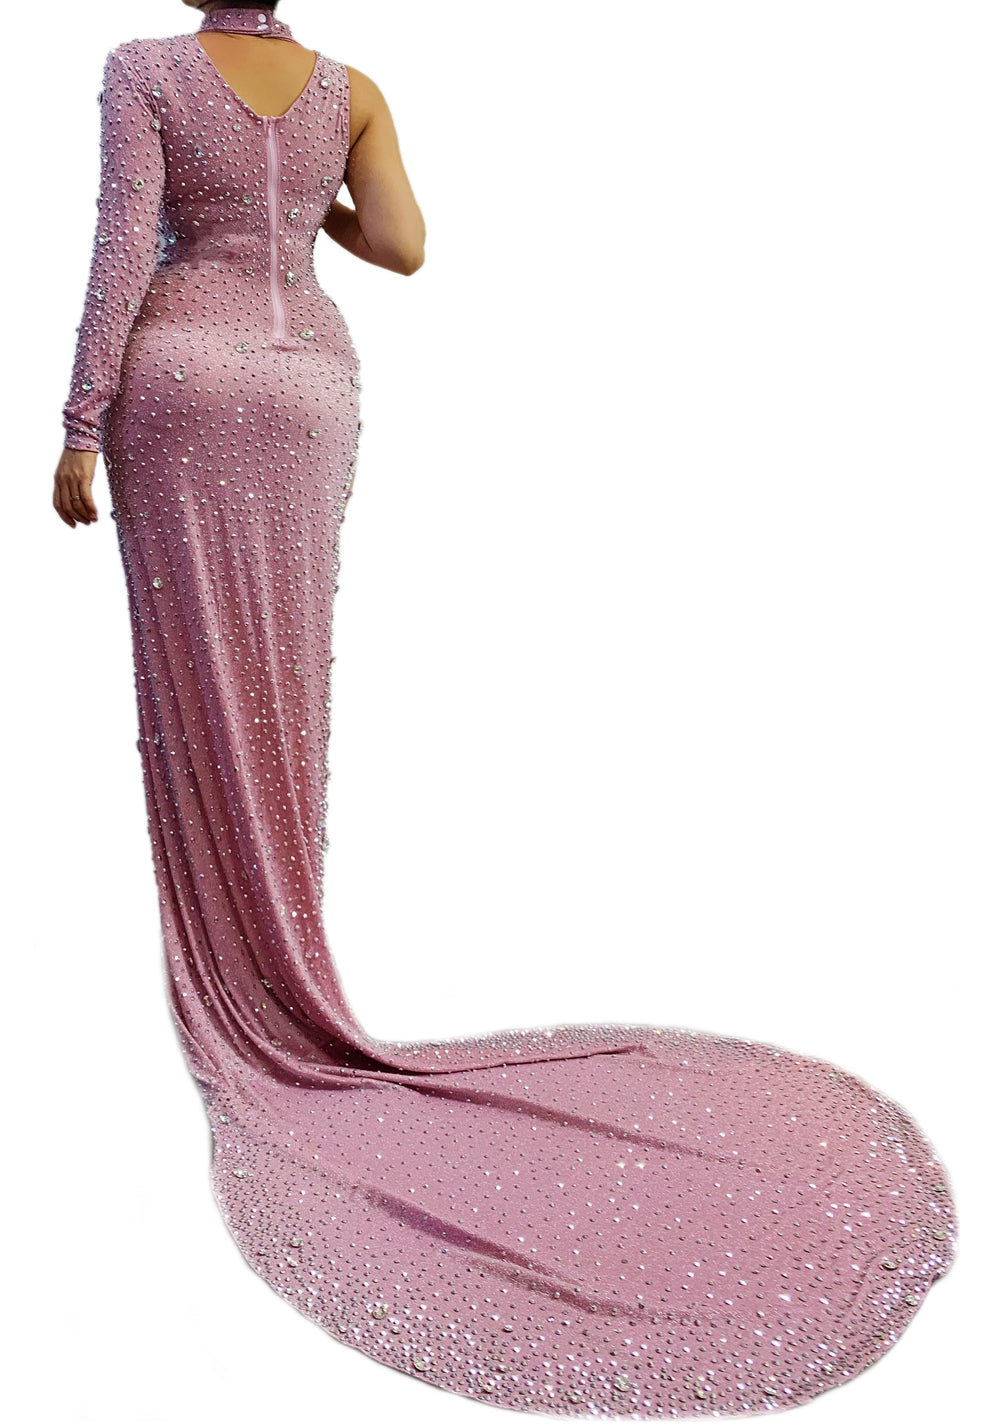 Luxuries Rhinestones One Shoulder Pink Long Dress Lady Evening Prom Party Gown Dresses Birthday Celebrate Outfit Sexy Stage Wear